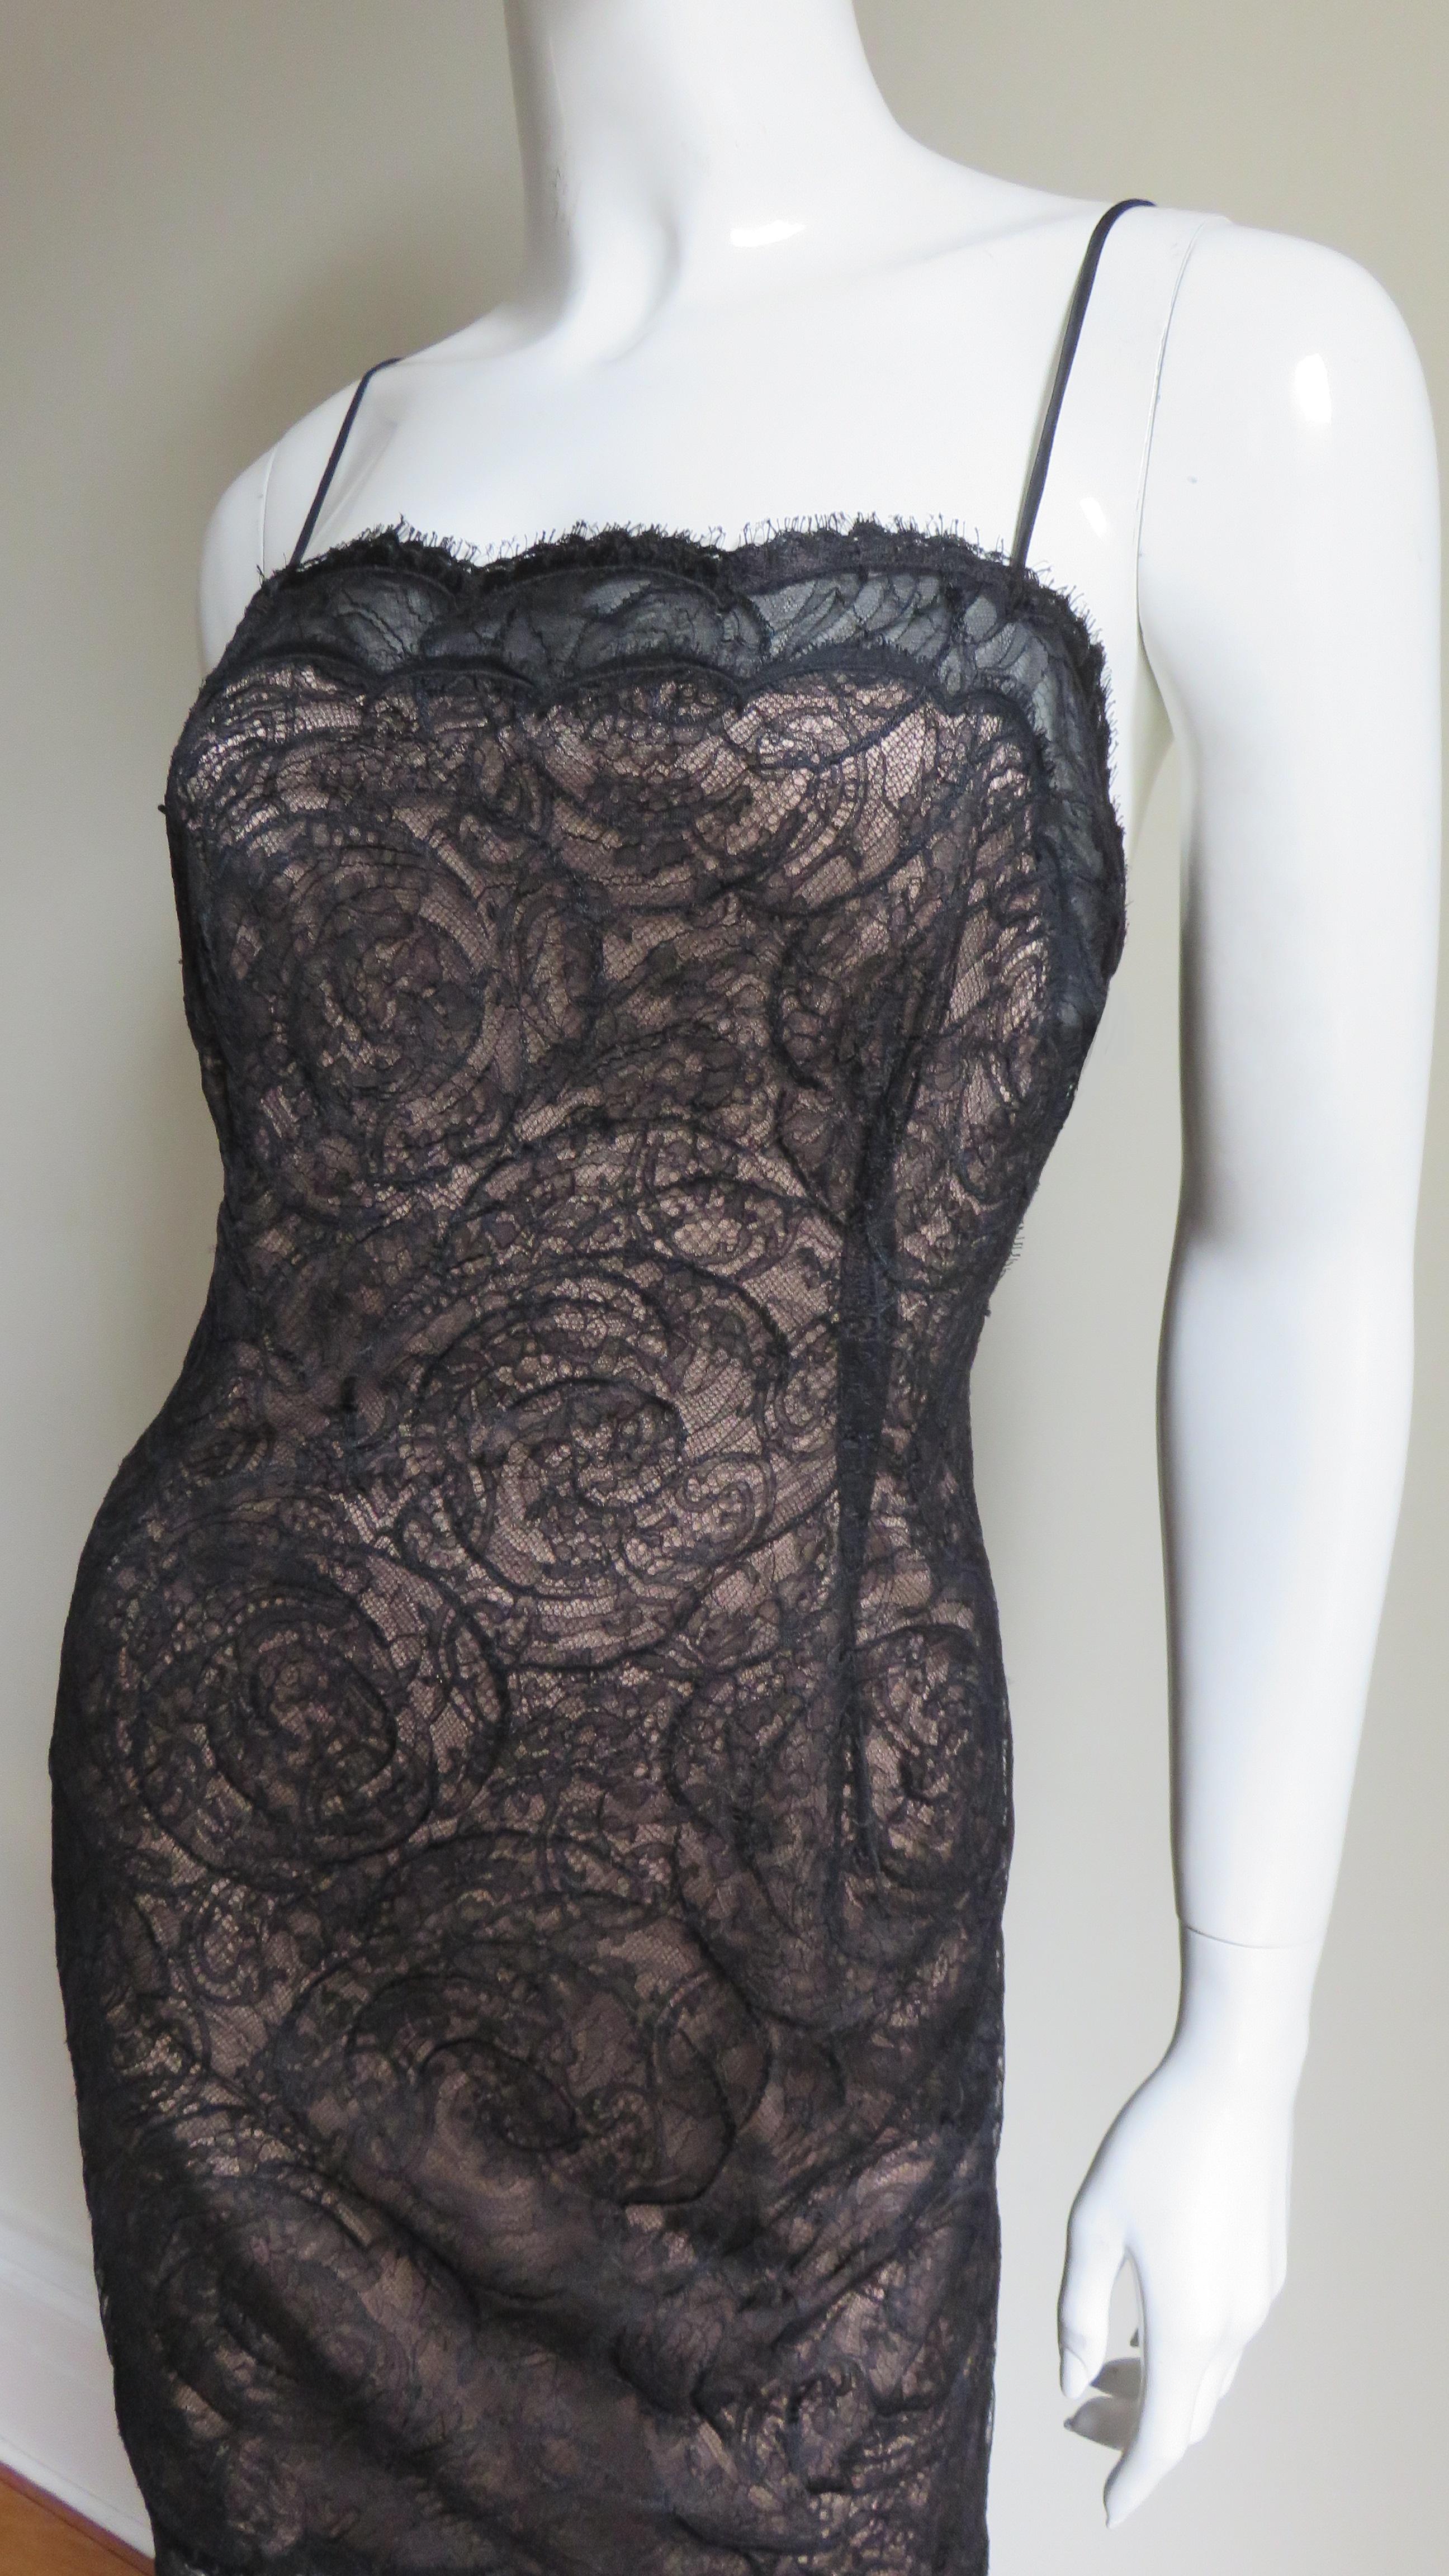 A fabulous black lace slip dress by Geoffrey Beene in an intracate, elaborate circular pattern. It has spaghetti straps with the scallop edge of the lace across the top of the dress and hem. The entire dress is lined in nude silk with the exception